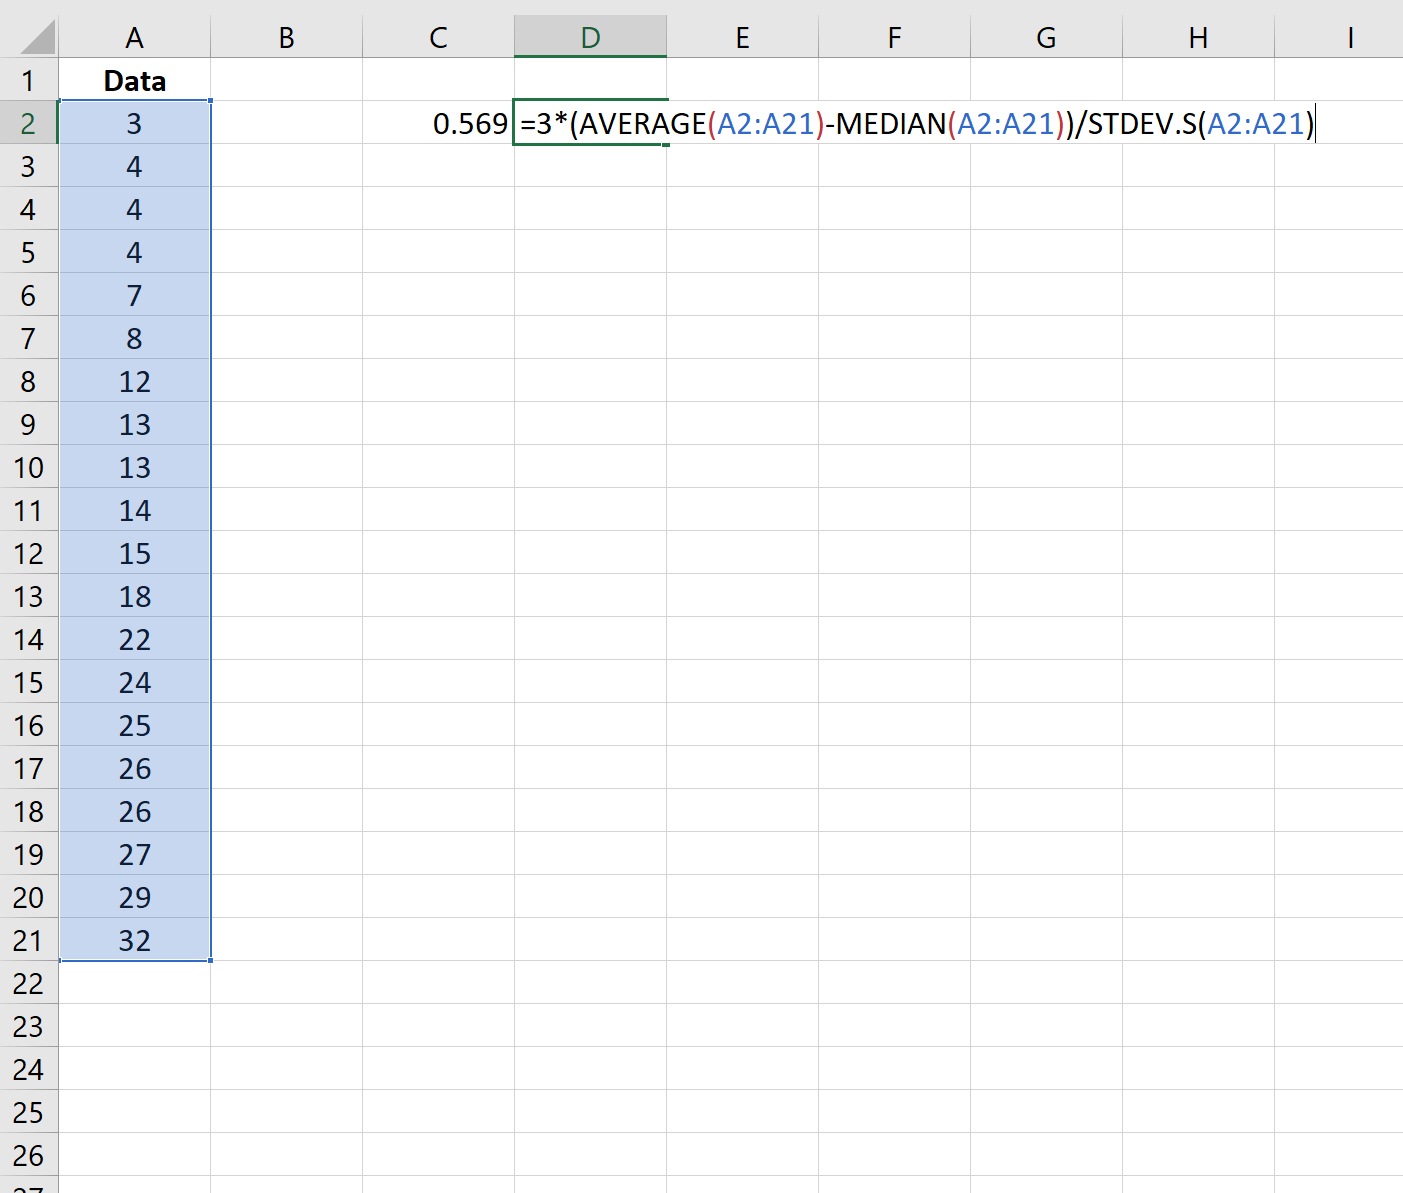 Pearson's coefficient of skewness in Excel using the median